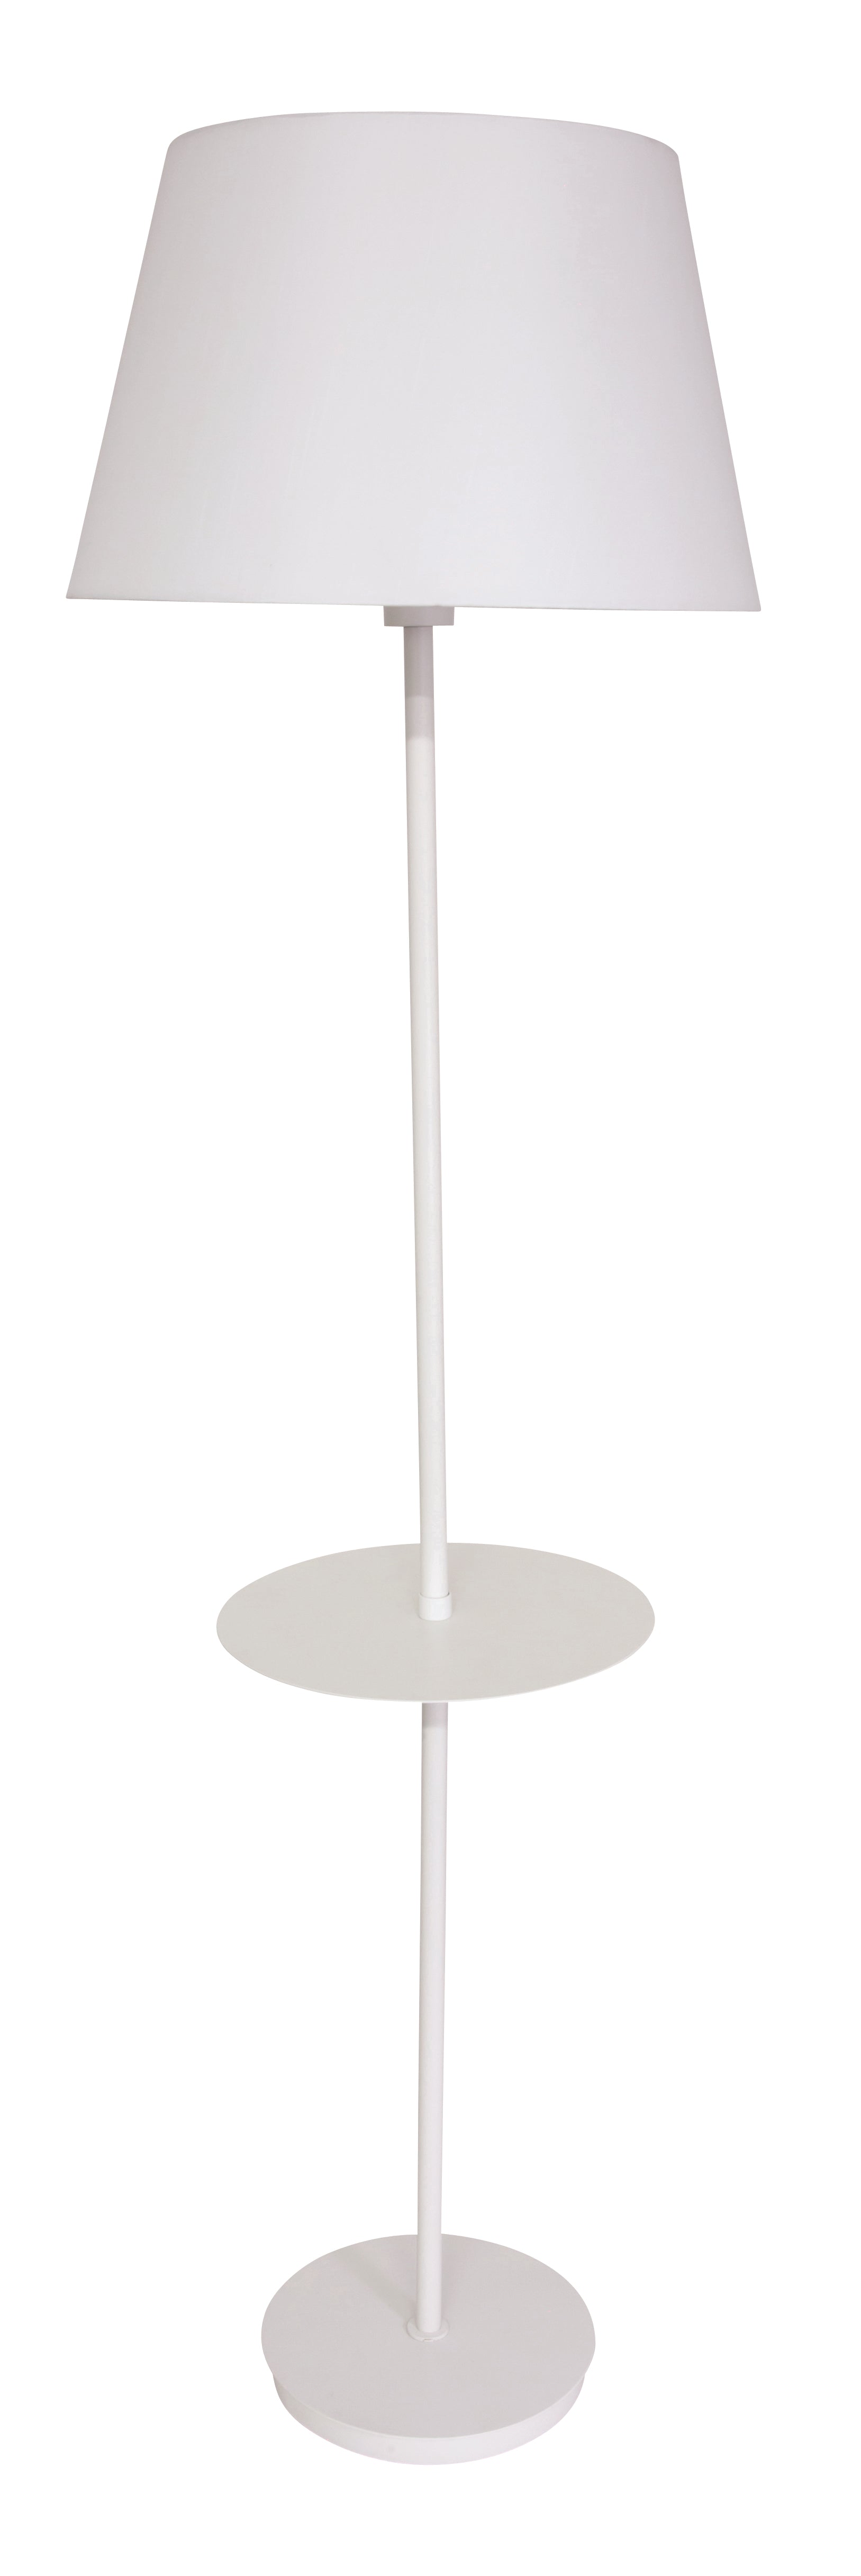 House of Troy Vernon 3-bulb Floor Lamp with Table in White VER502-WT